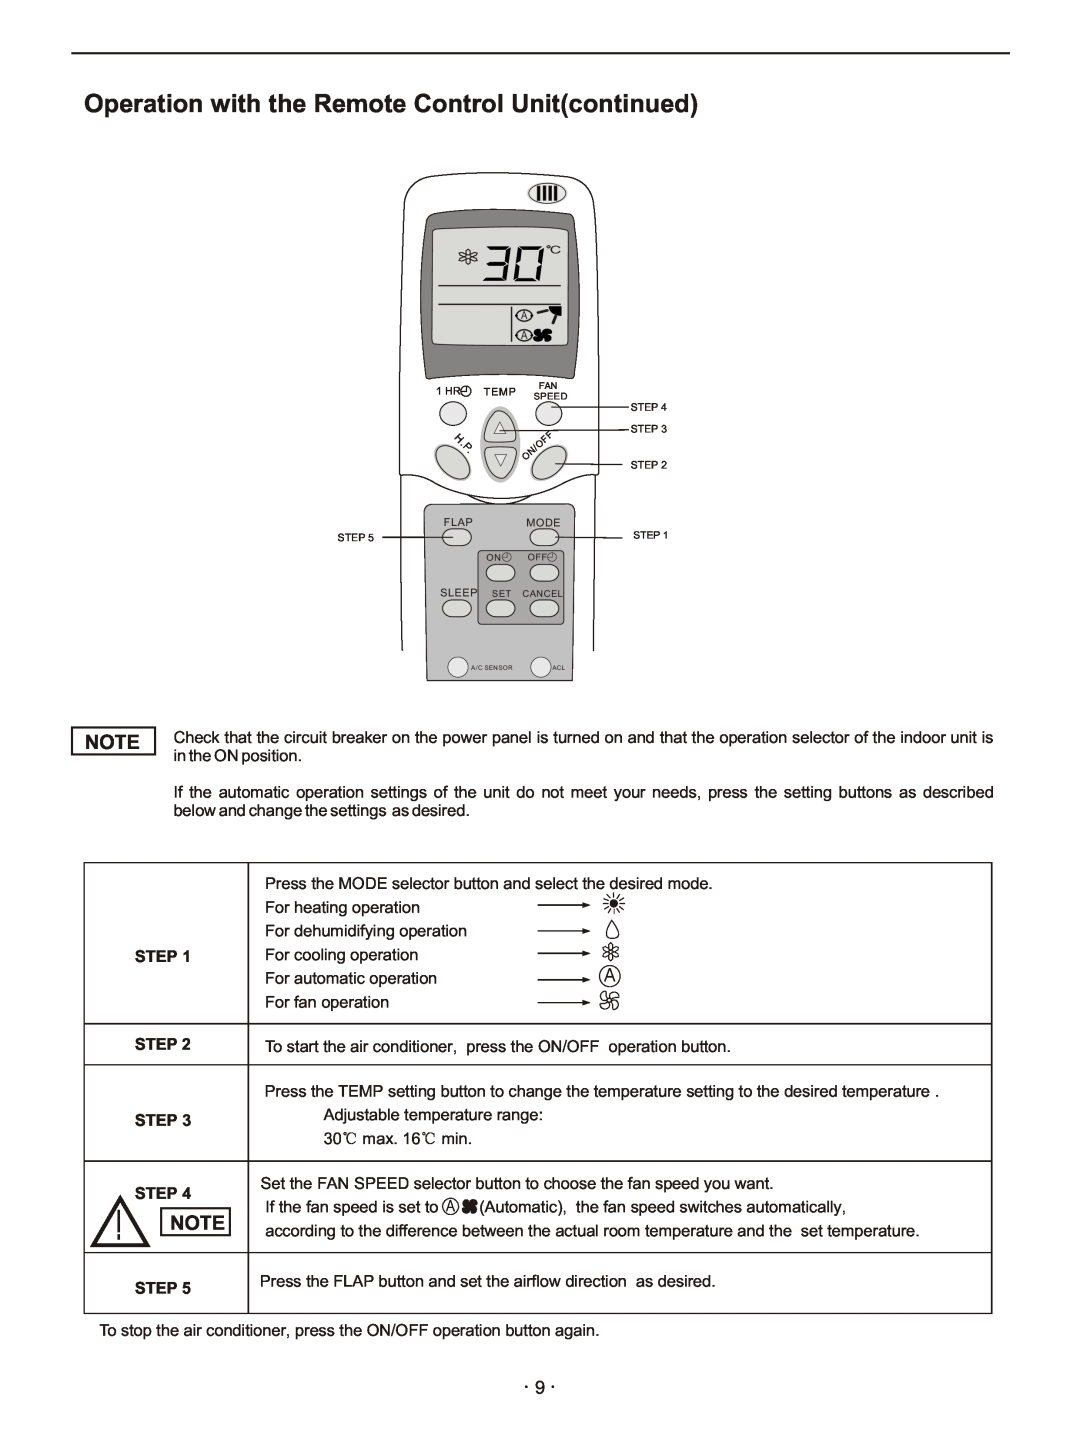 Hisense Group KFR-3208GW instruction manual Operation with the Remote Control Unitcontinued, Step 